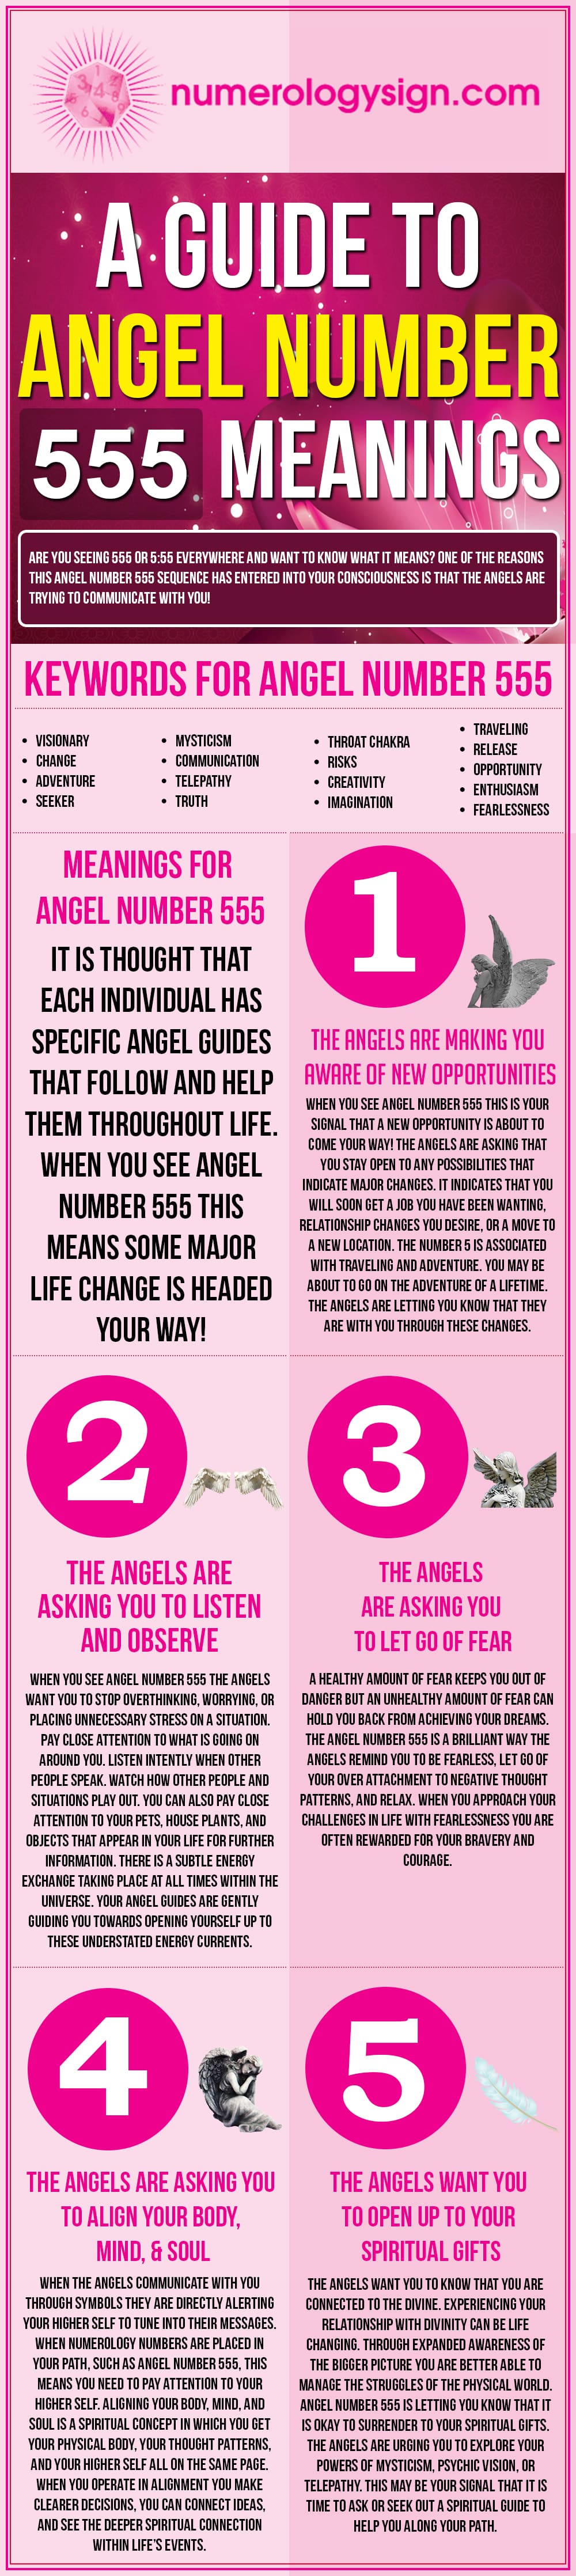 Angel Number 555 Meanings Infographic